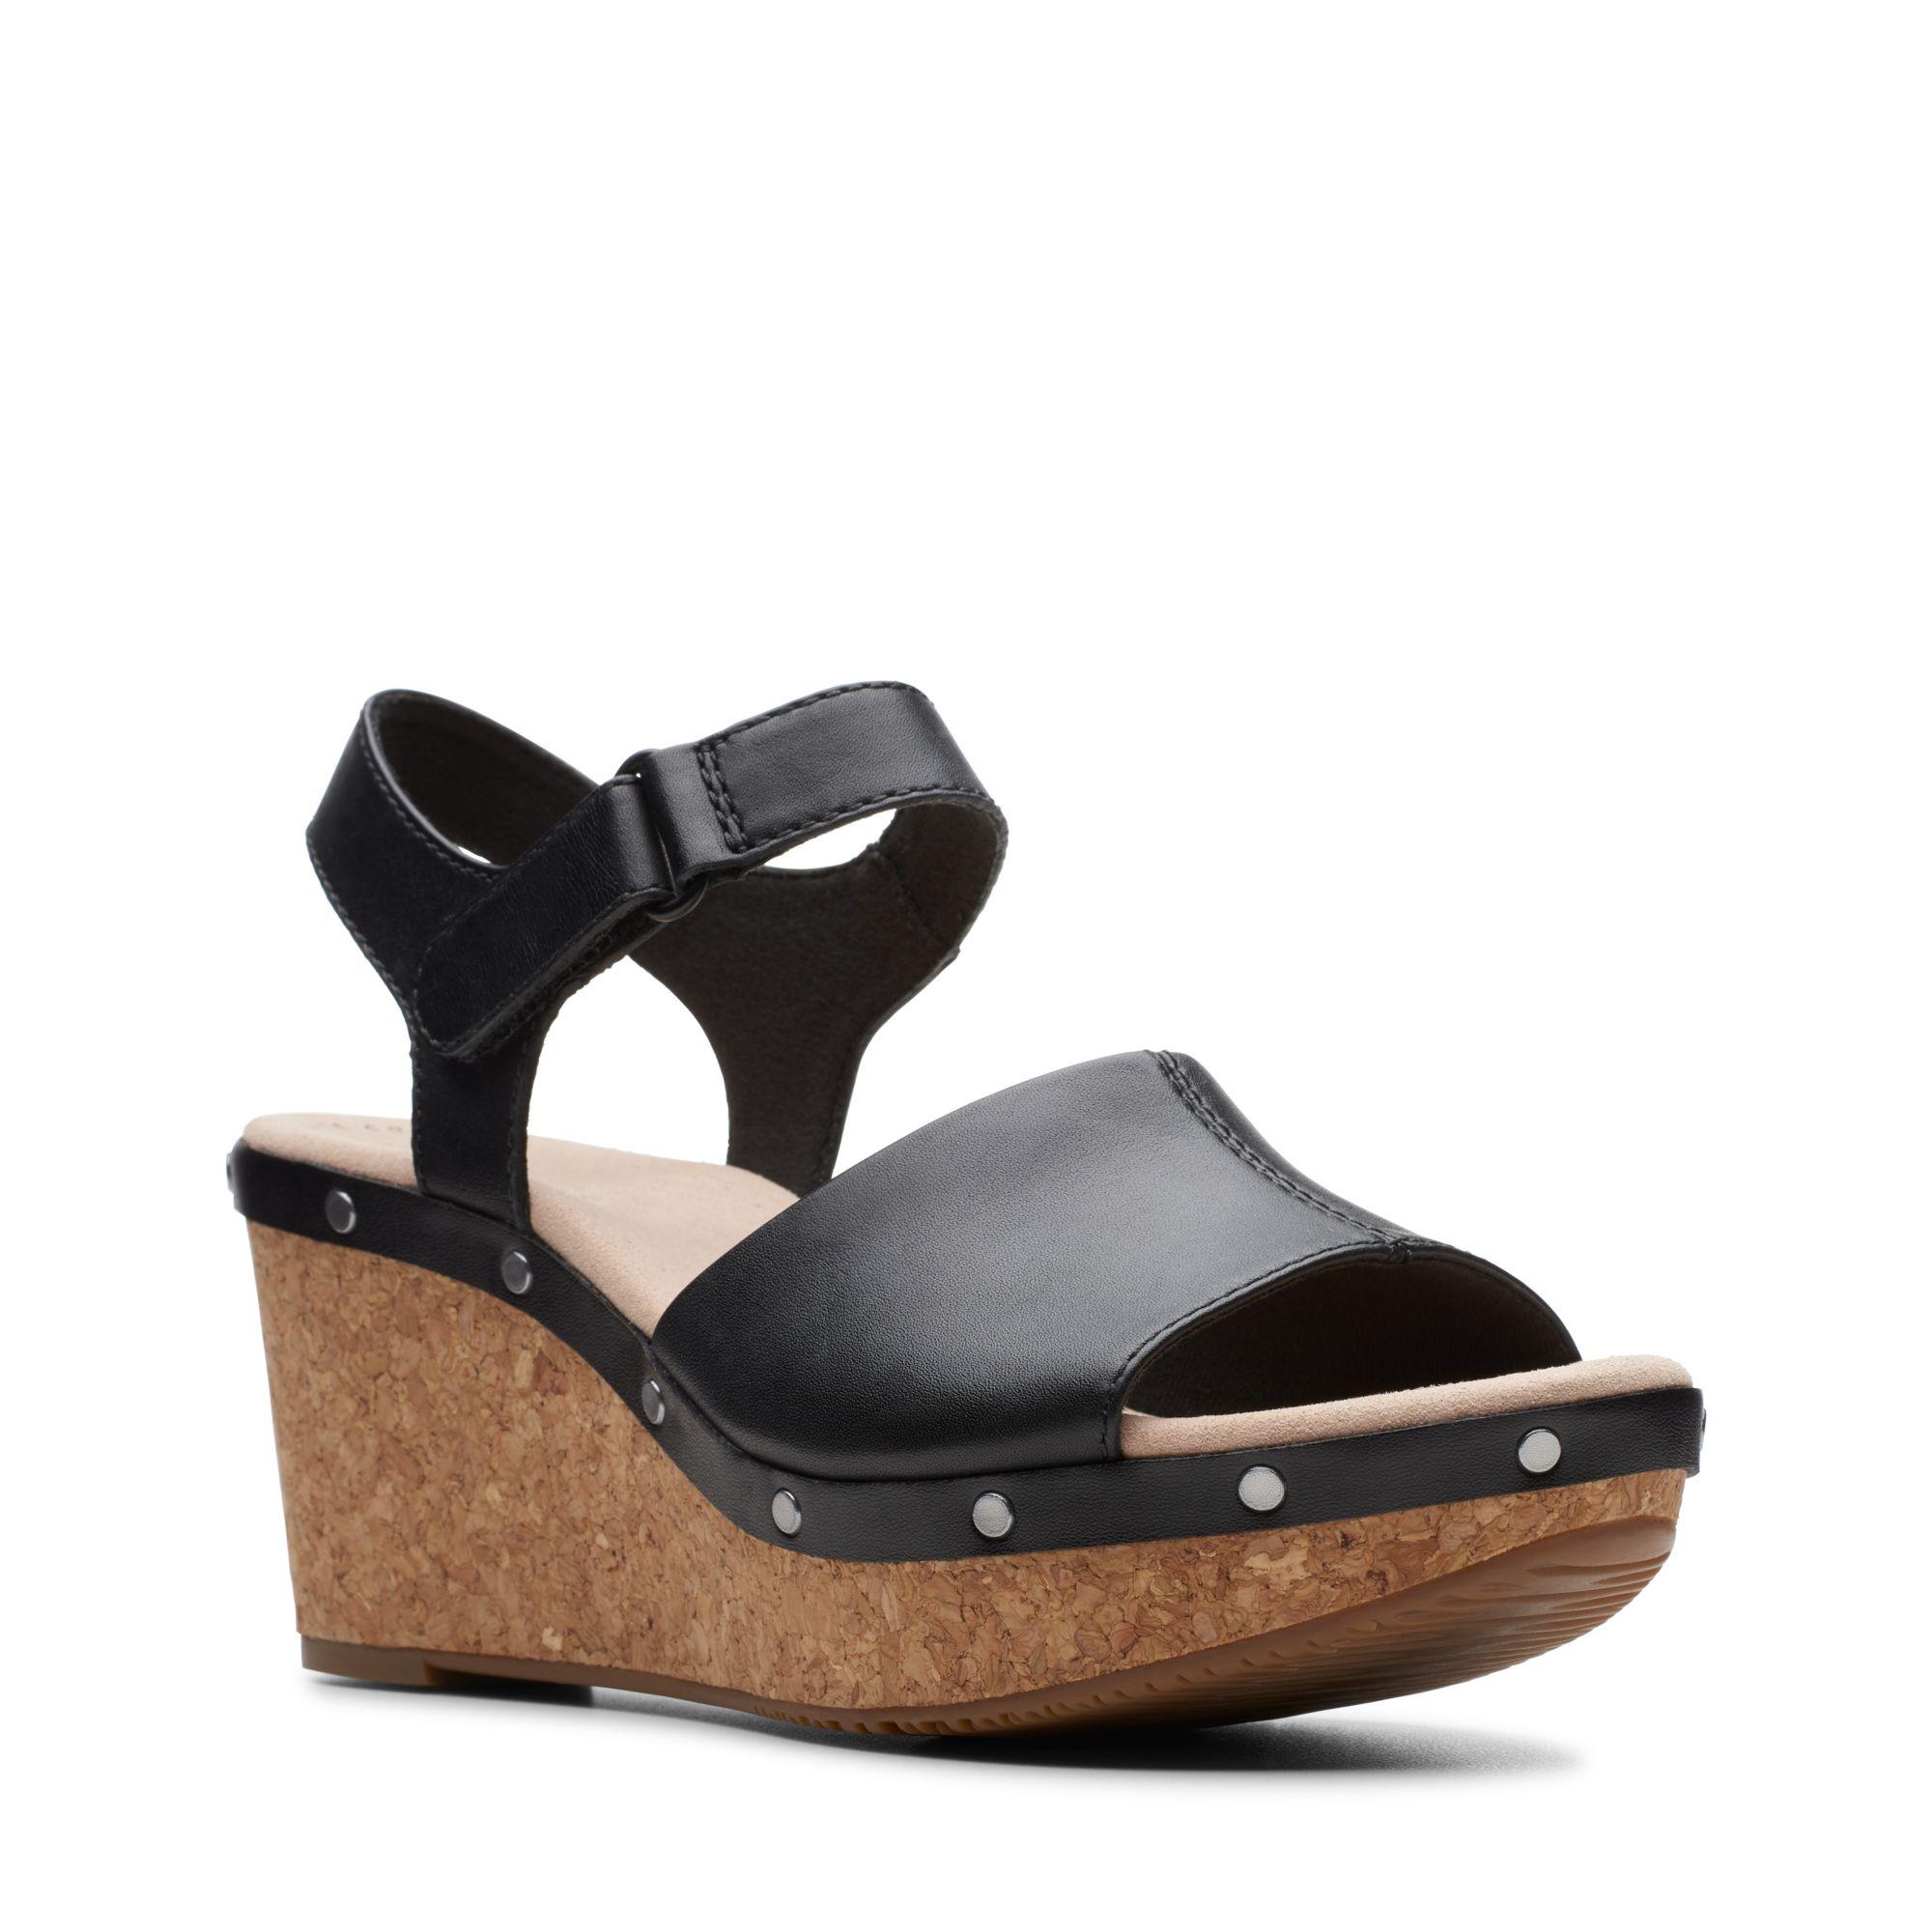 Clarks Leather Annadel Clover Wedge Sandal in Black Leather (Black) - Save  35% - Lyst